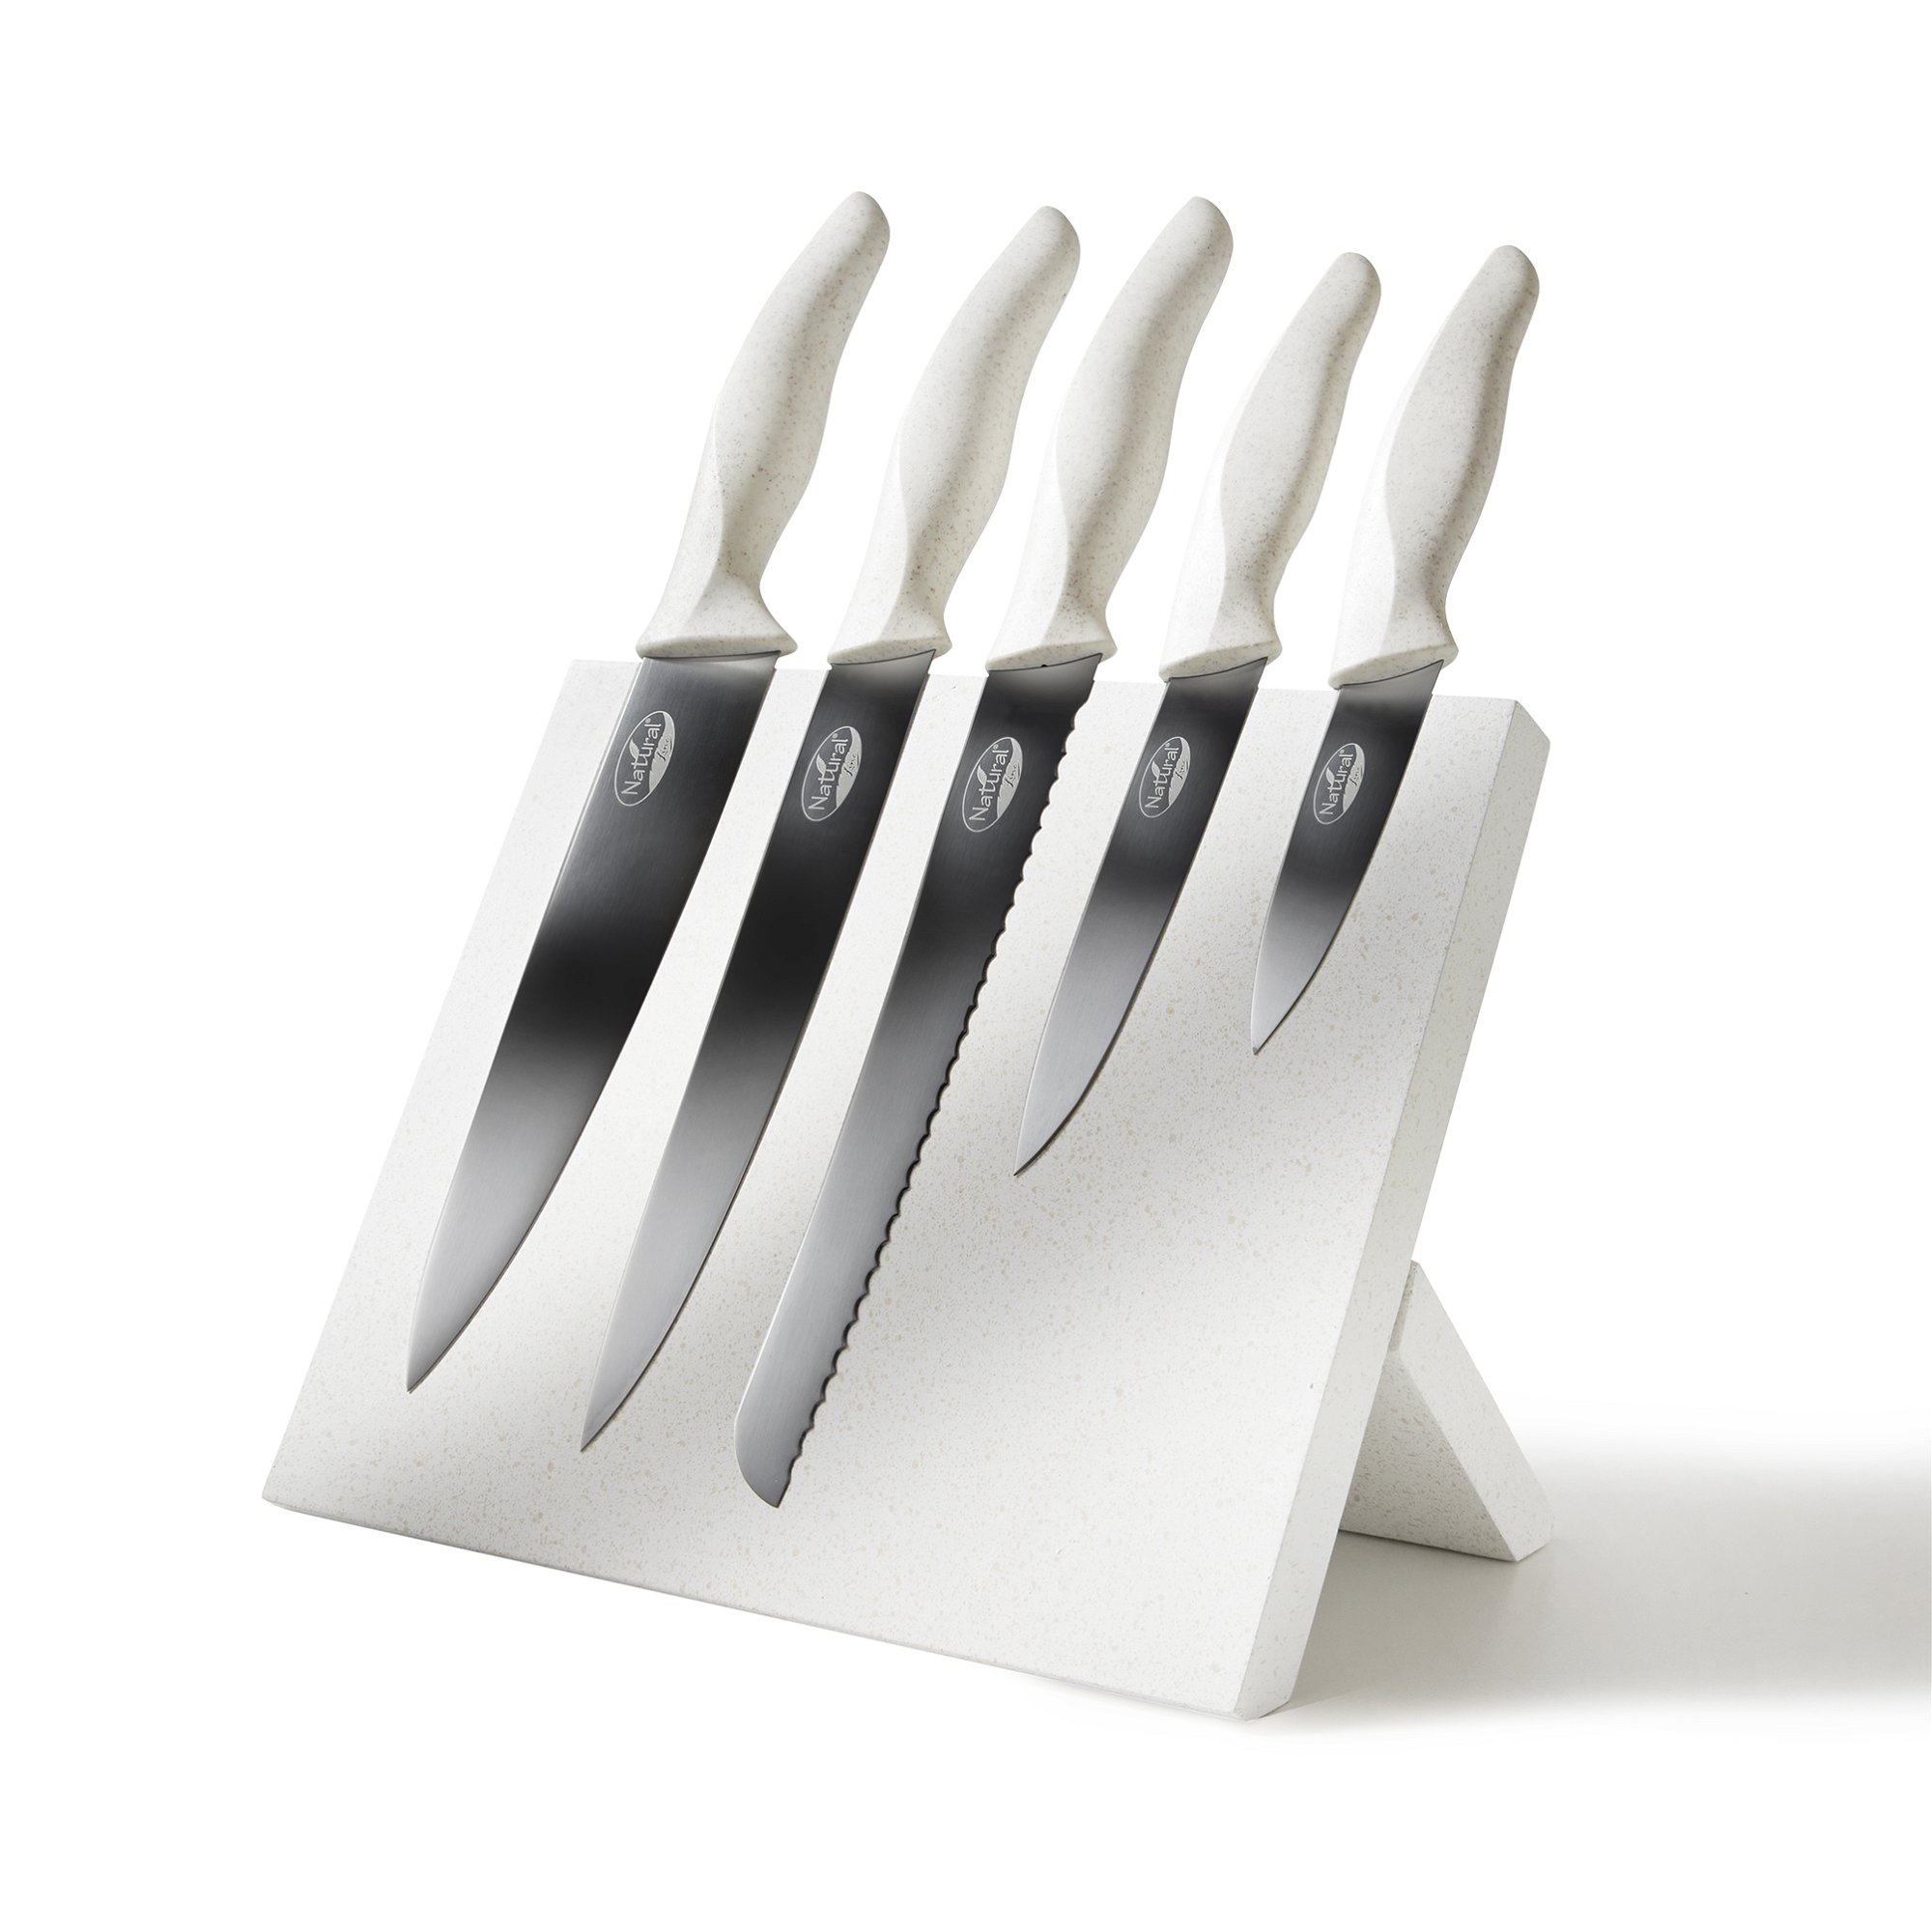 Natural Line® 5 pc Stainless Steel Knives Set, with Foldable Magnetic Knife Block